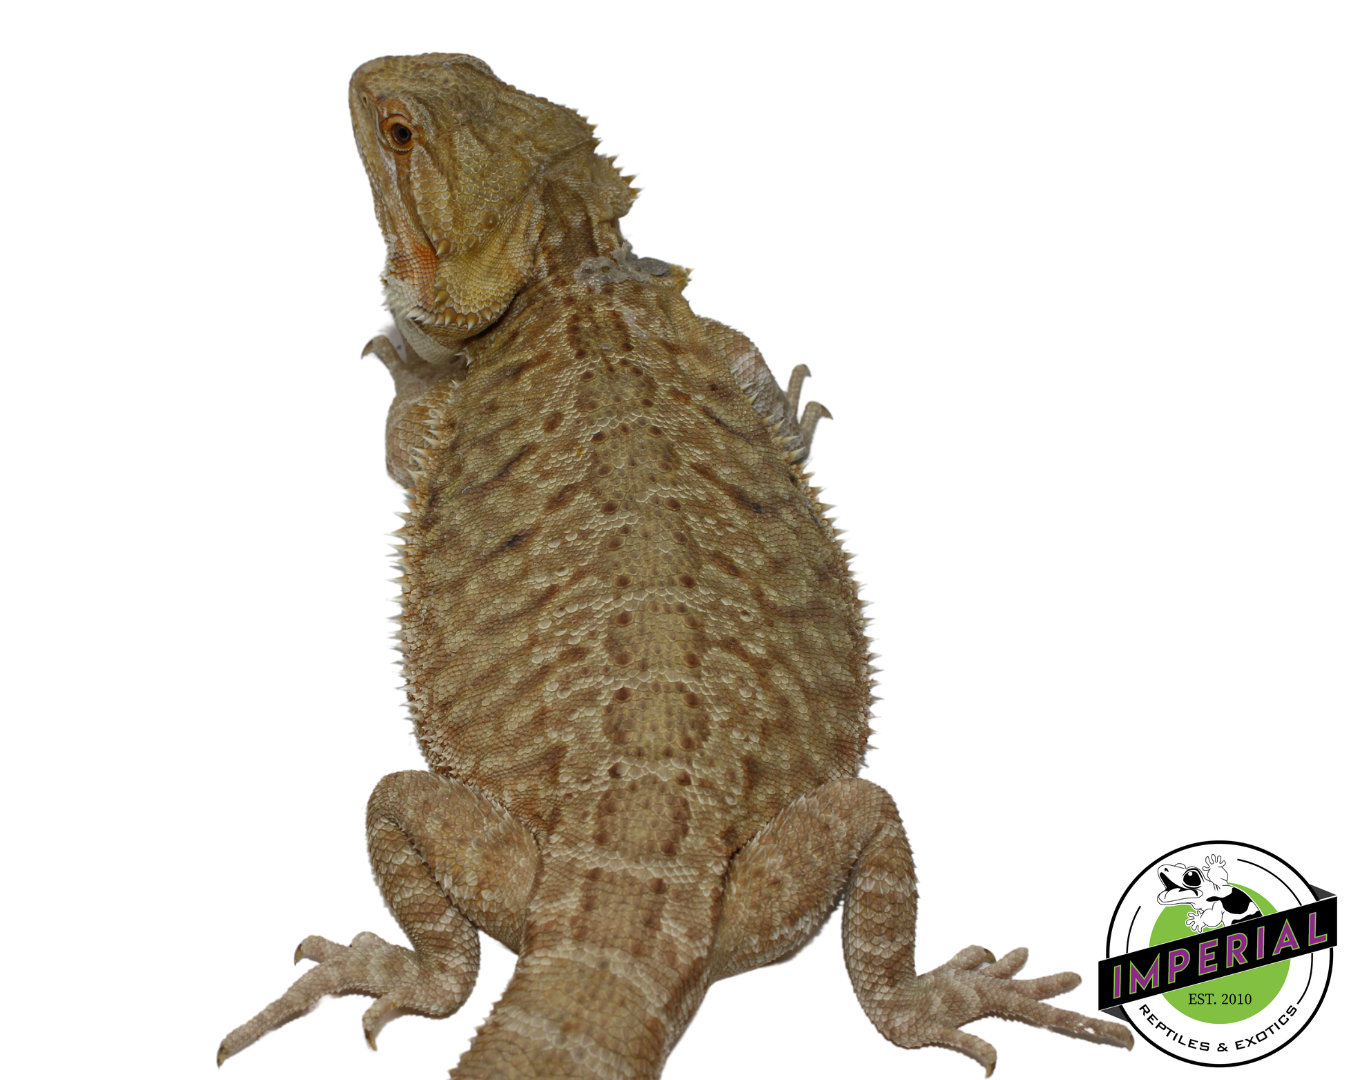 Leatherback Bearded Dragon for sale, reptiles for sale, buy reptiles online